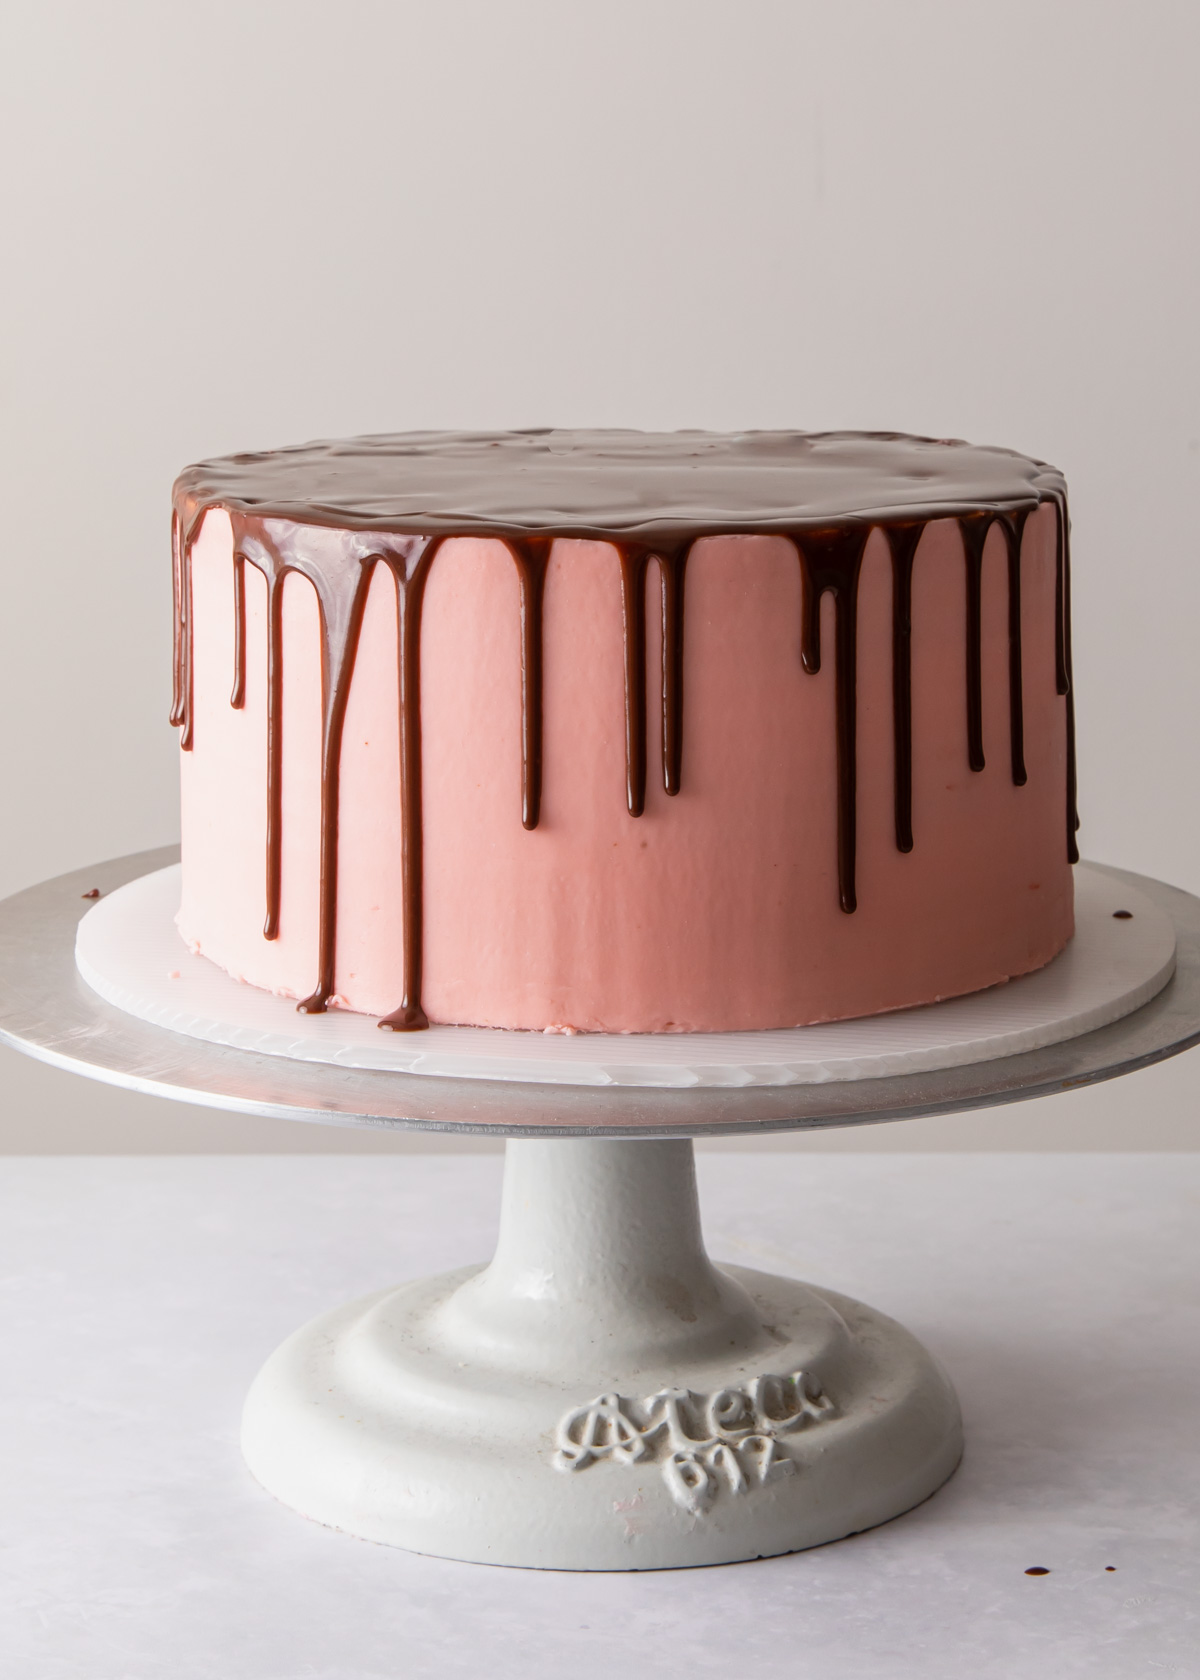 A perfect chocolate drip cake with pink buttercream frosting